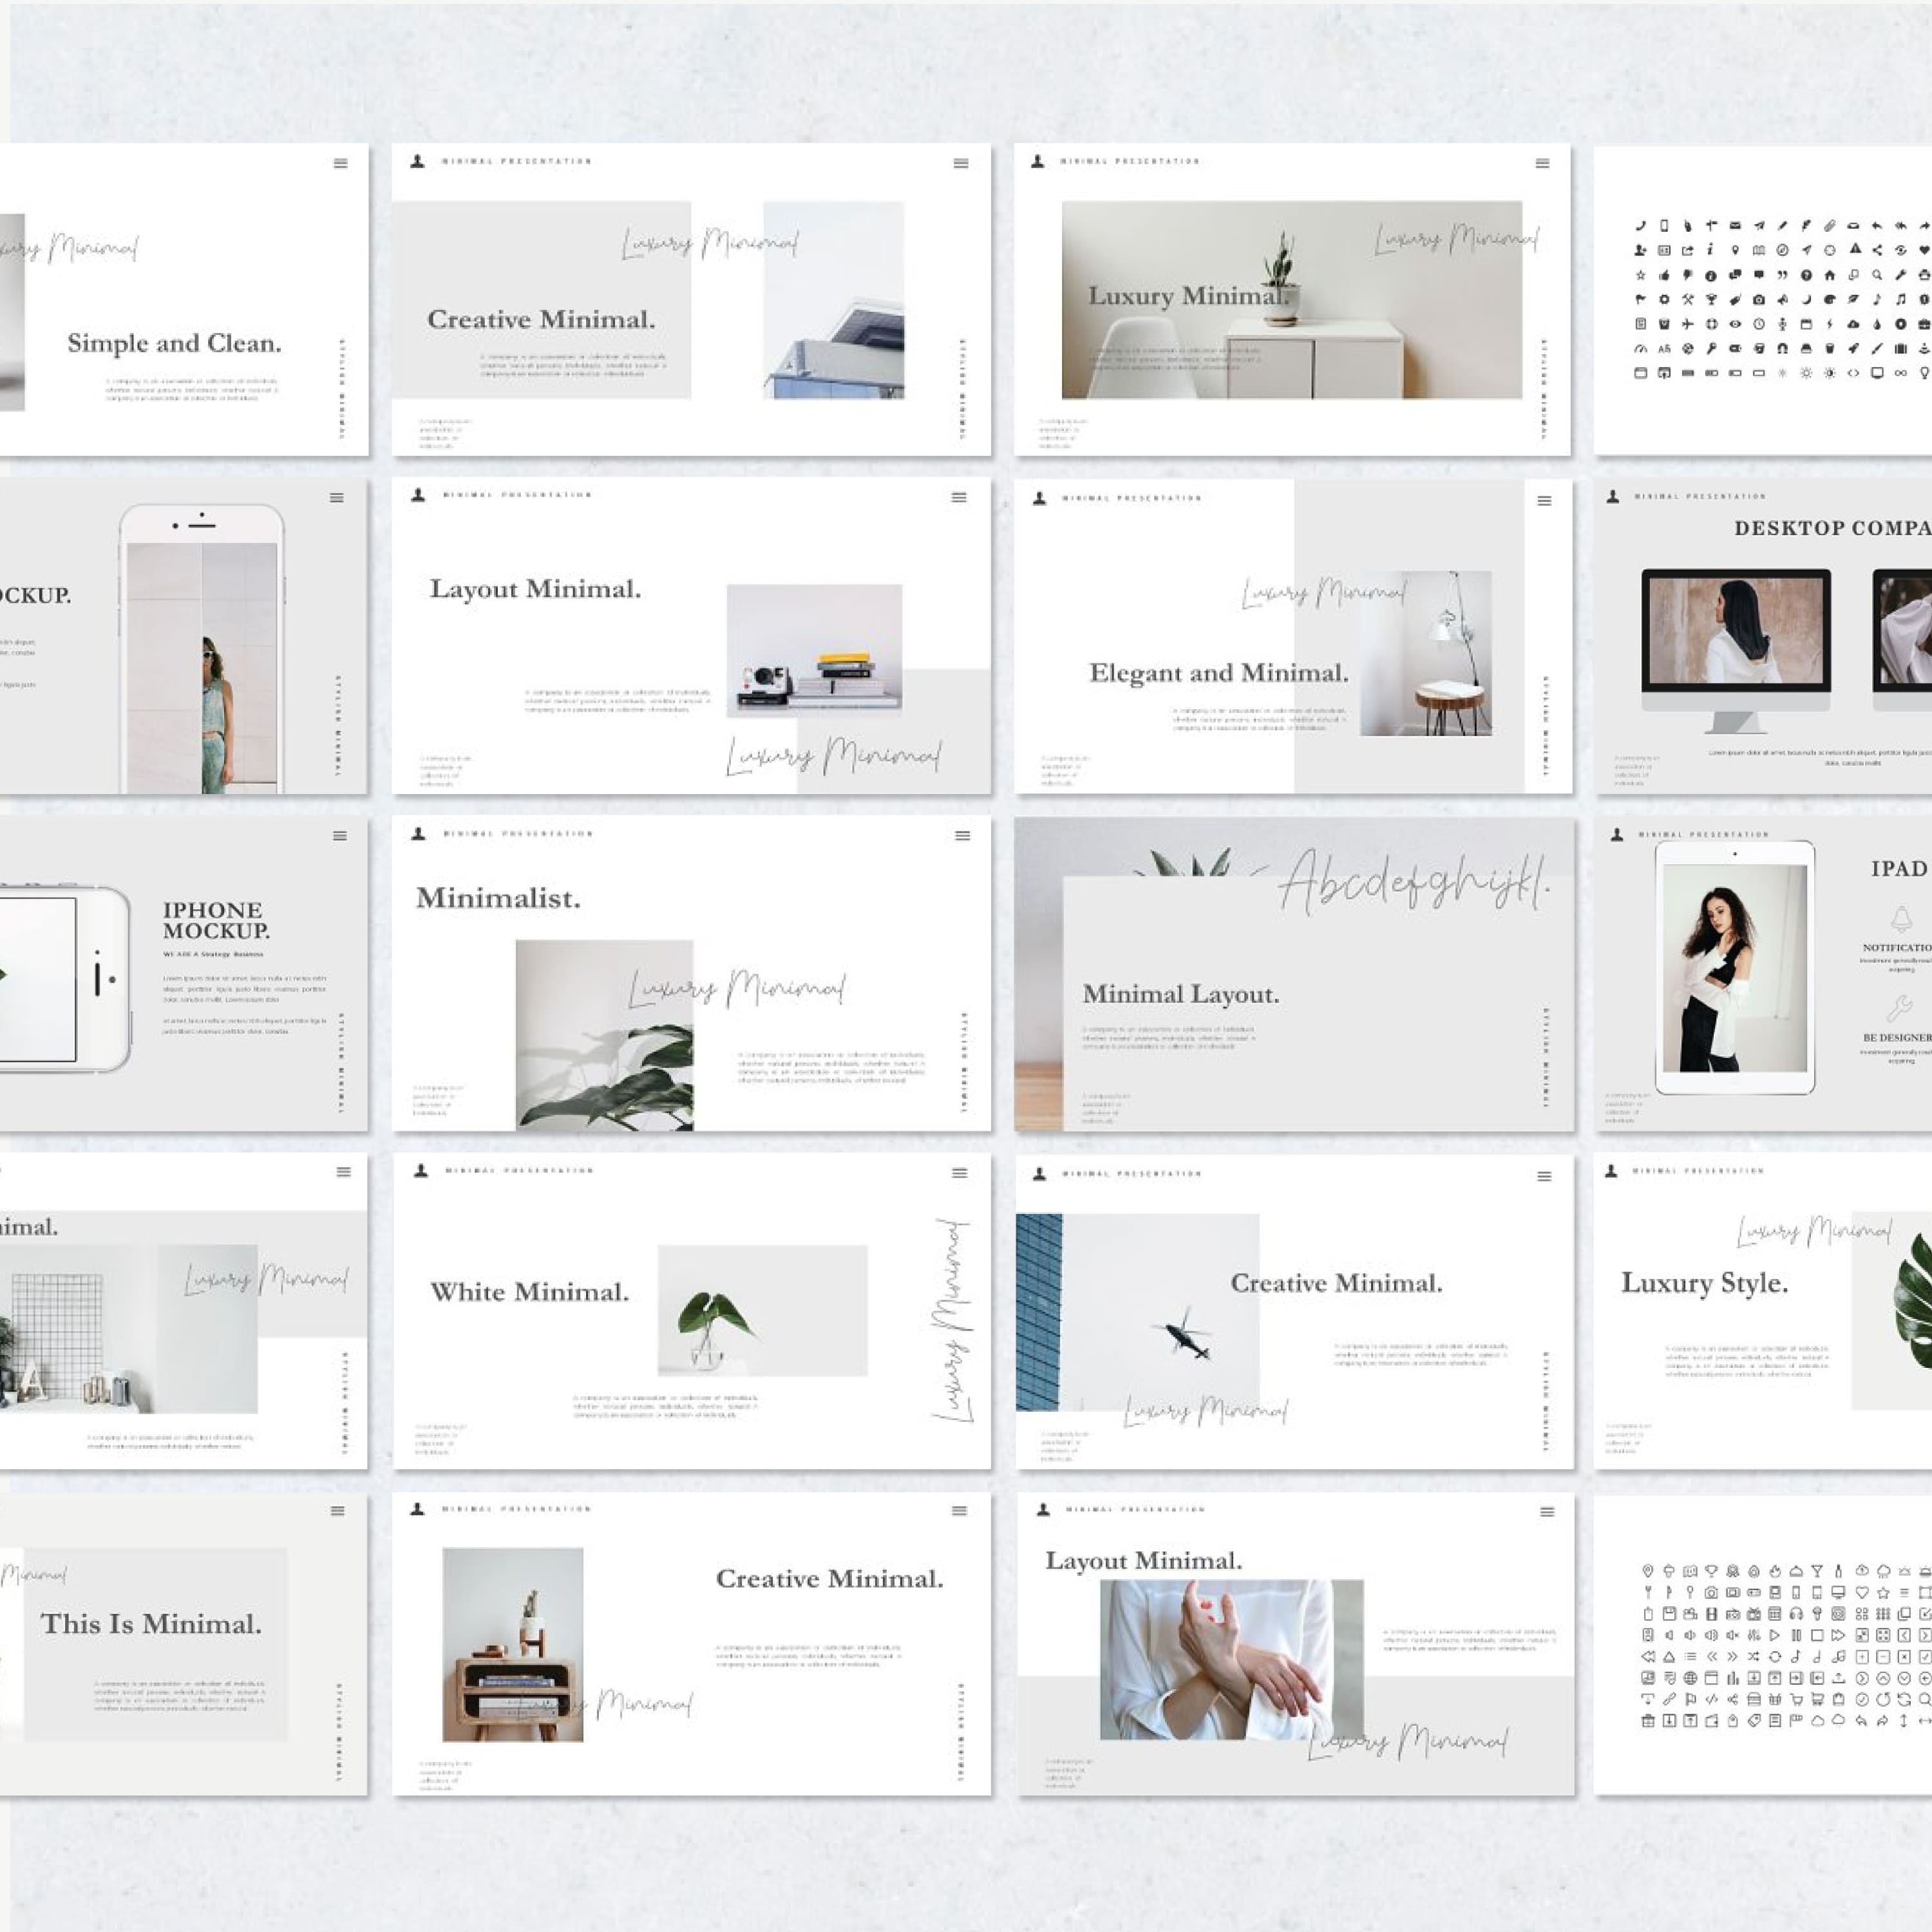 Luxury - Minimal Powerpoint Template created by Barland Design.